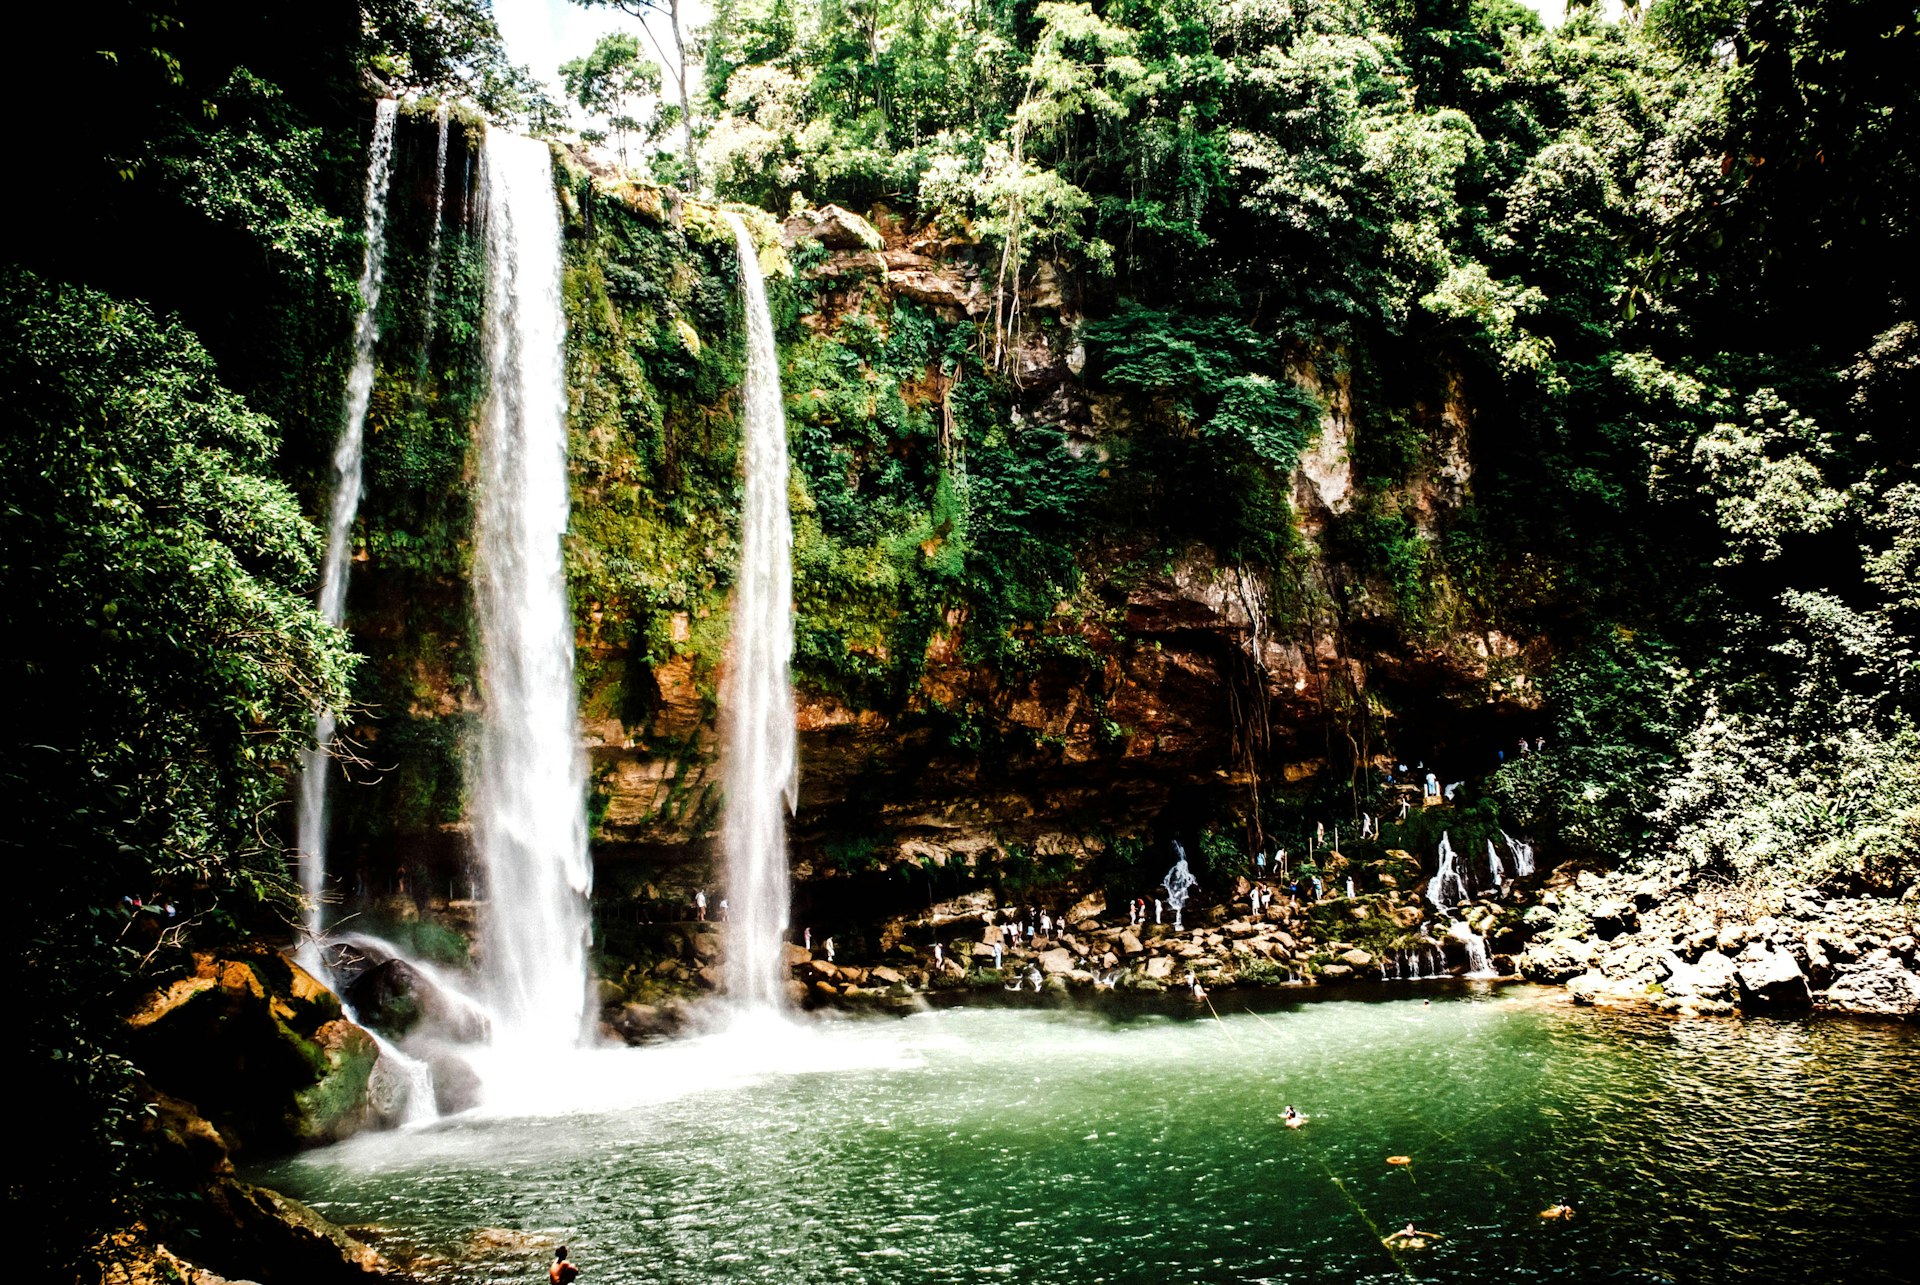 Taking a dip in XXXXX is a good way to cool off in the sticky Chiapas jungle. Image by Giulia Fiori Photography / Getty Images